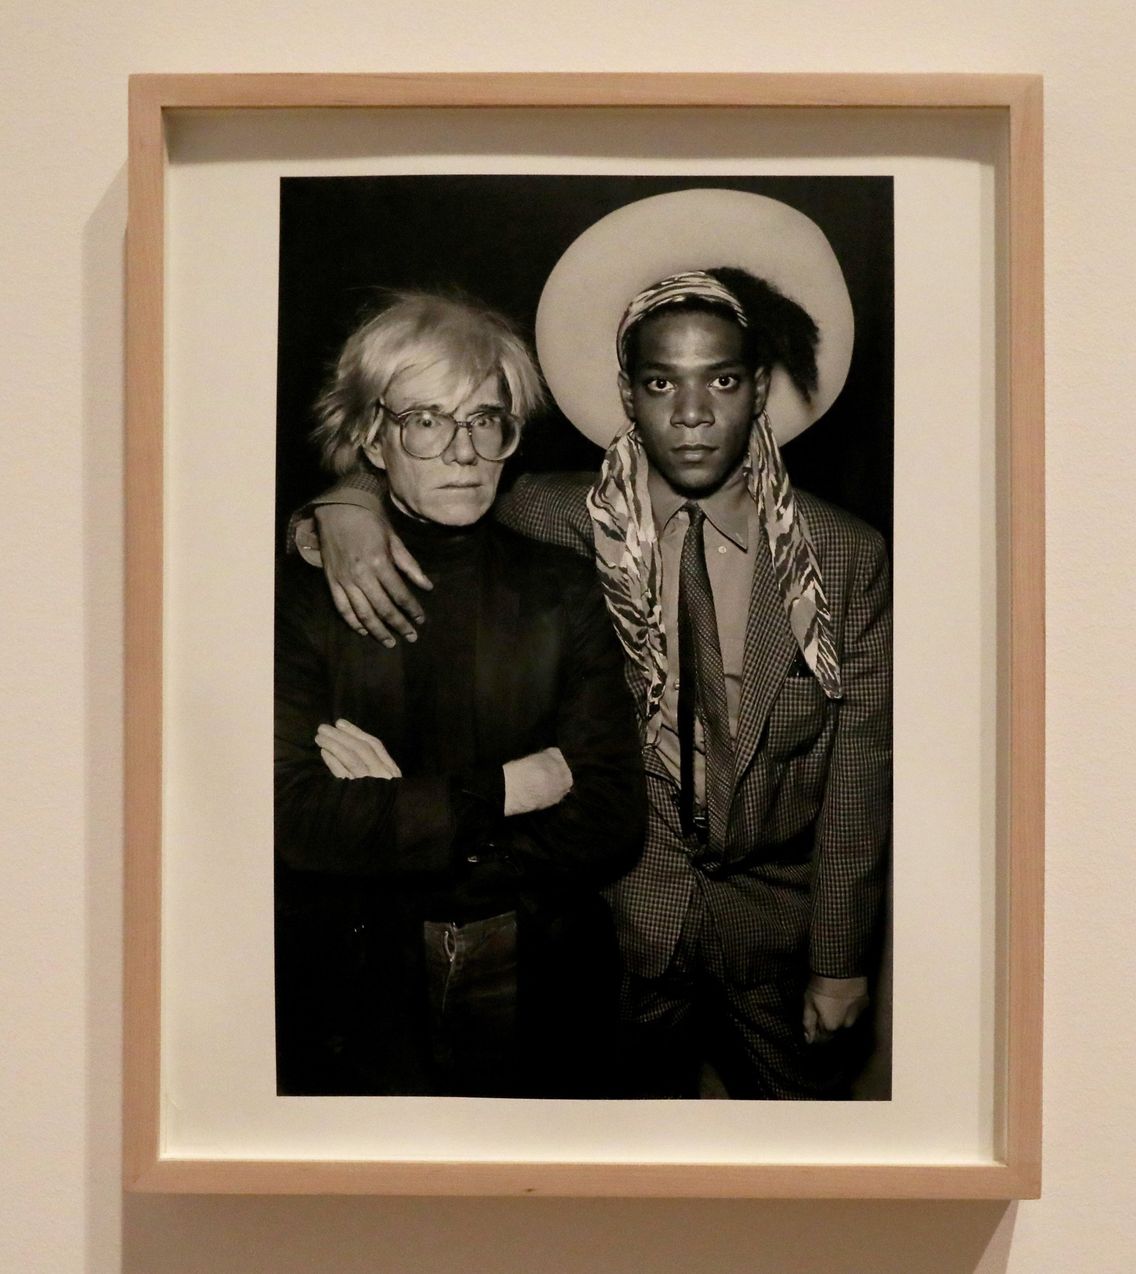 A one-painting Basquiat exhibition arrives at Seattle Art Museum | The ...